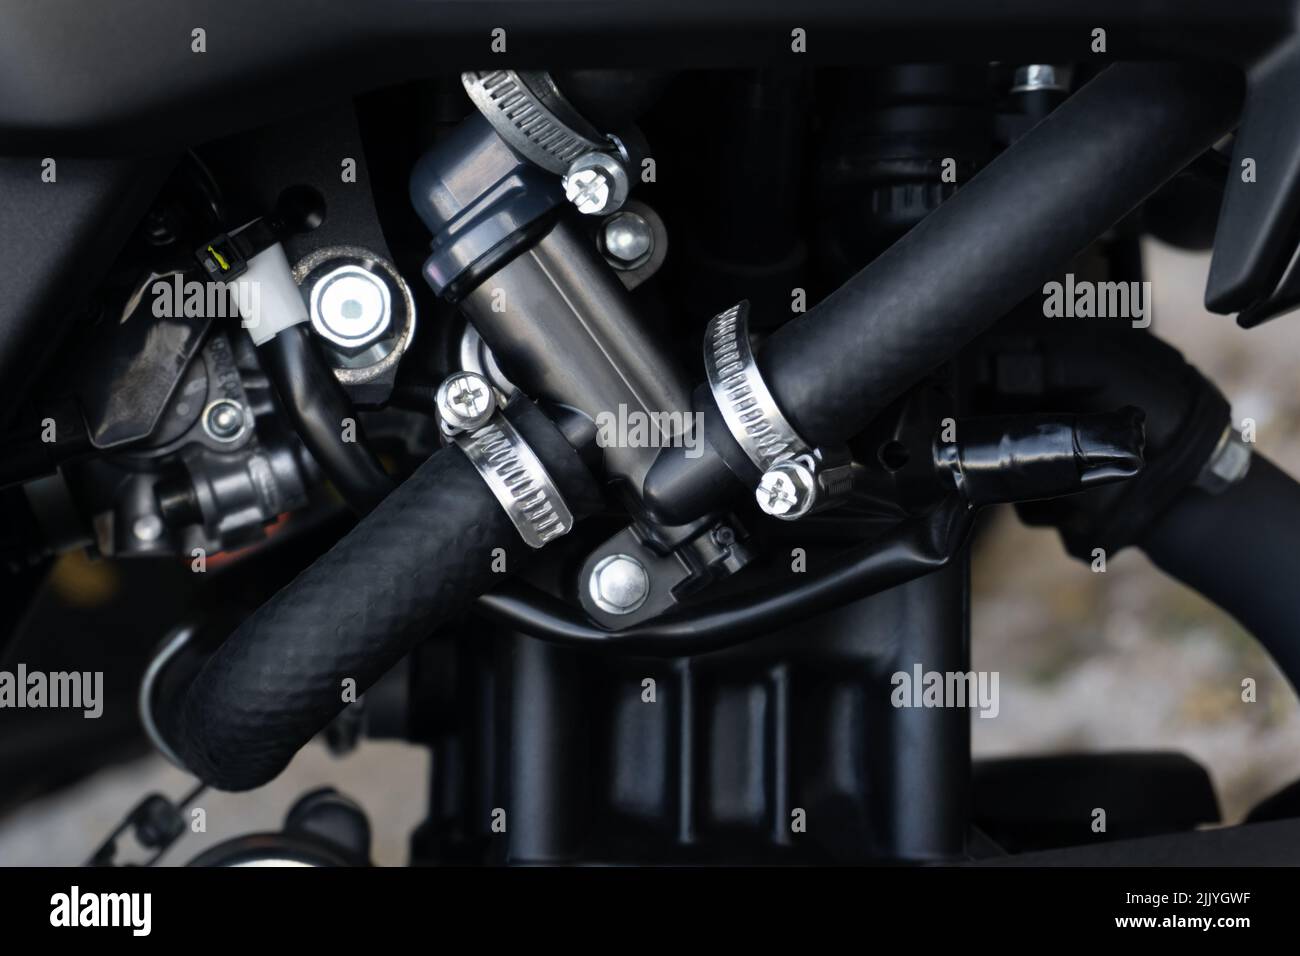 Metal motorcycle parts and tubes close-up view Stock Photo